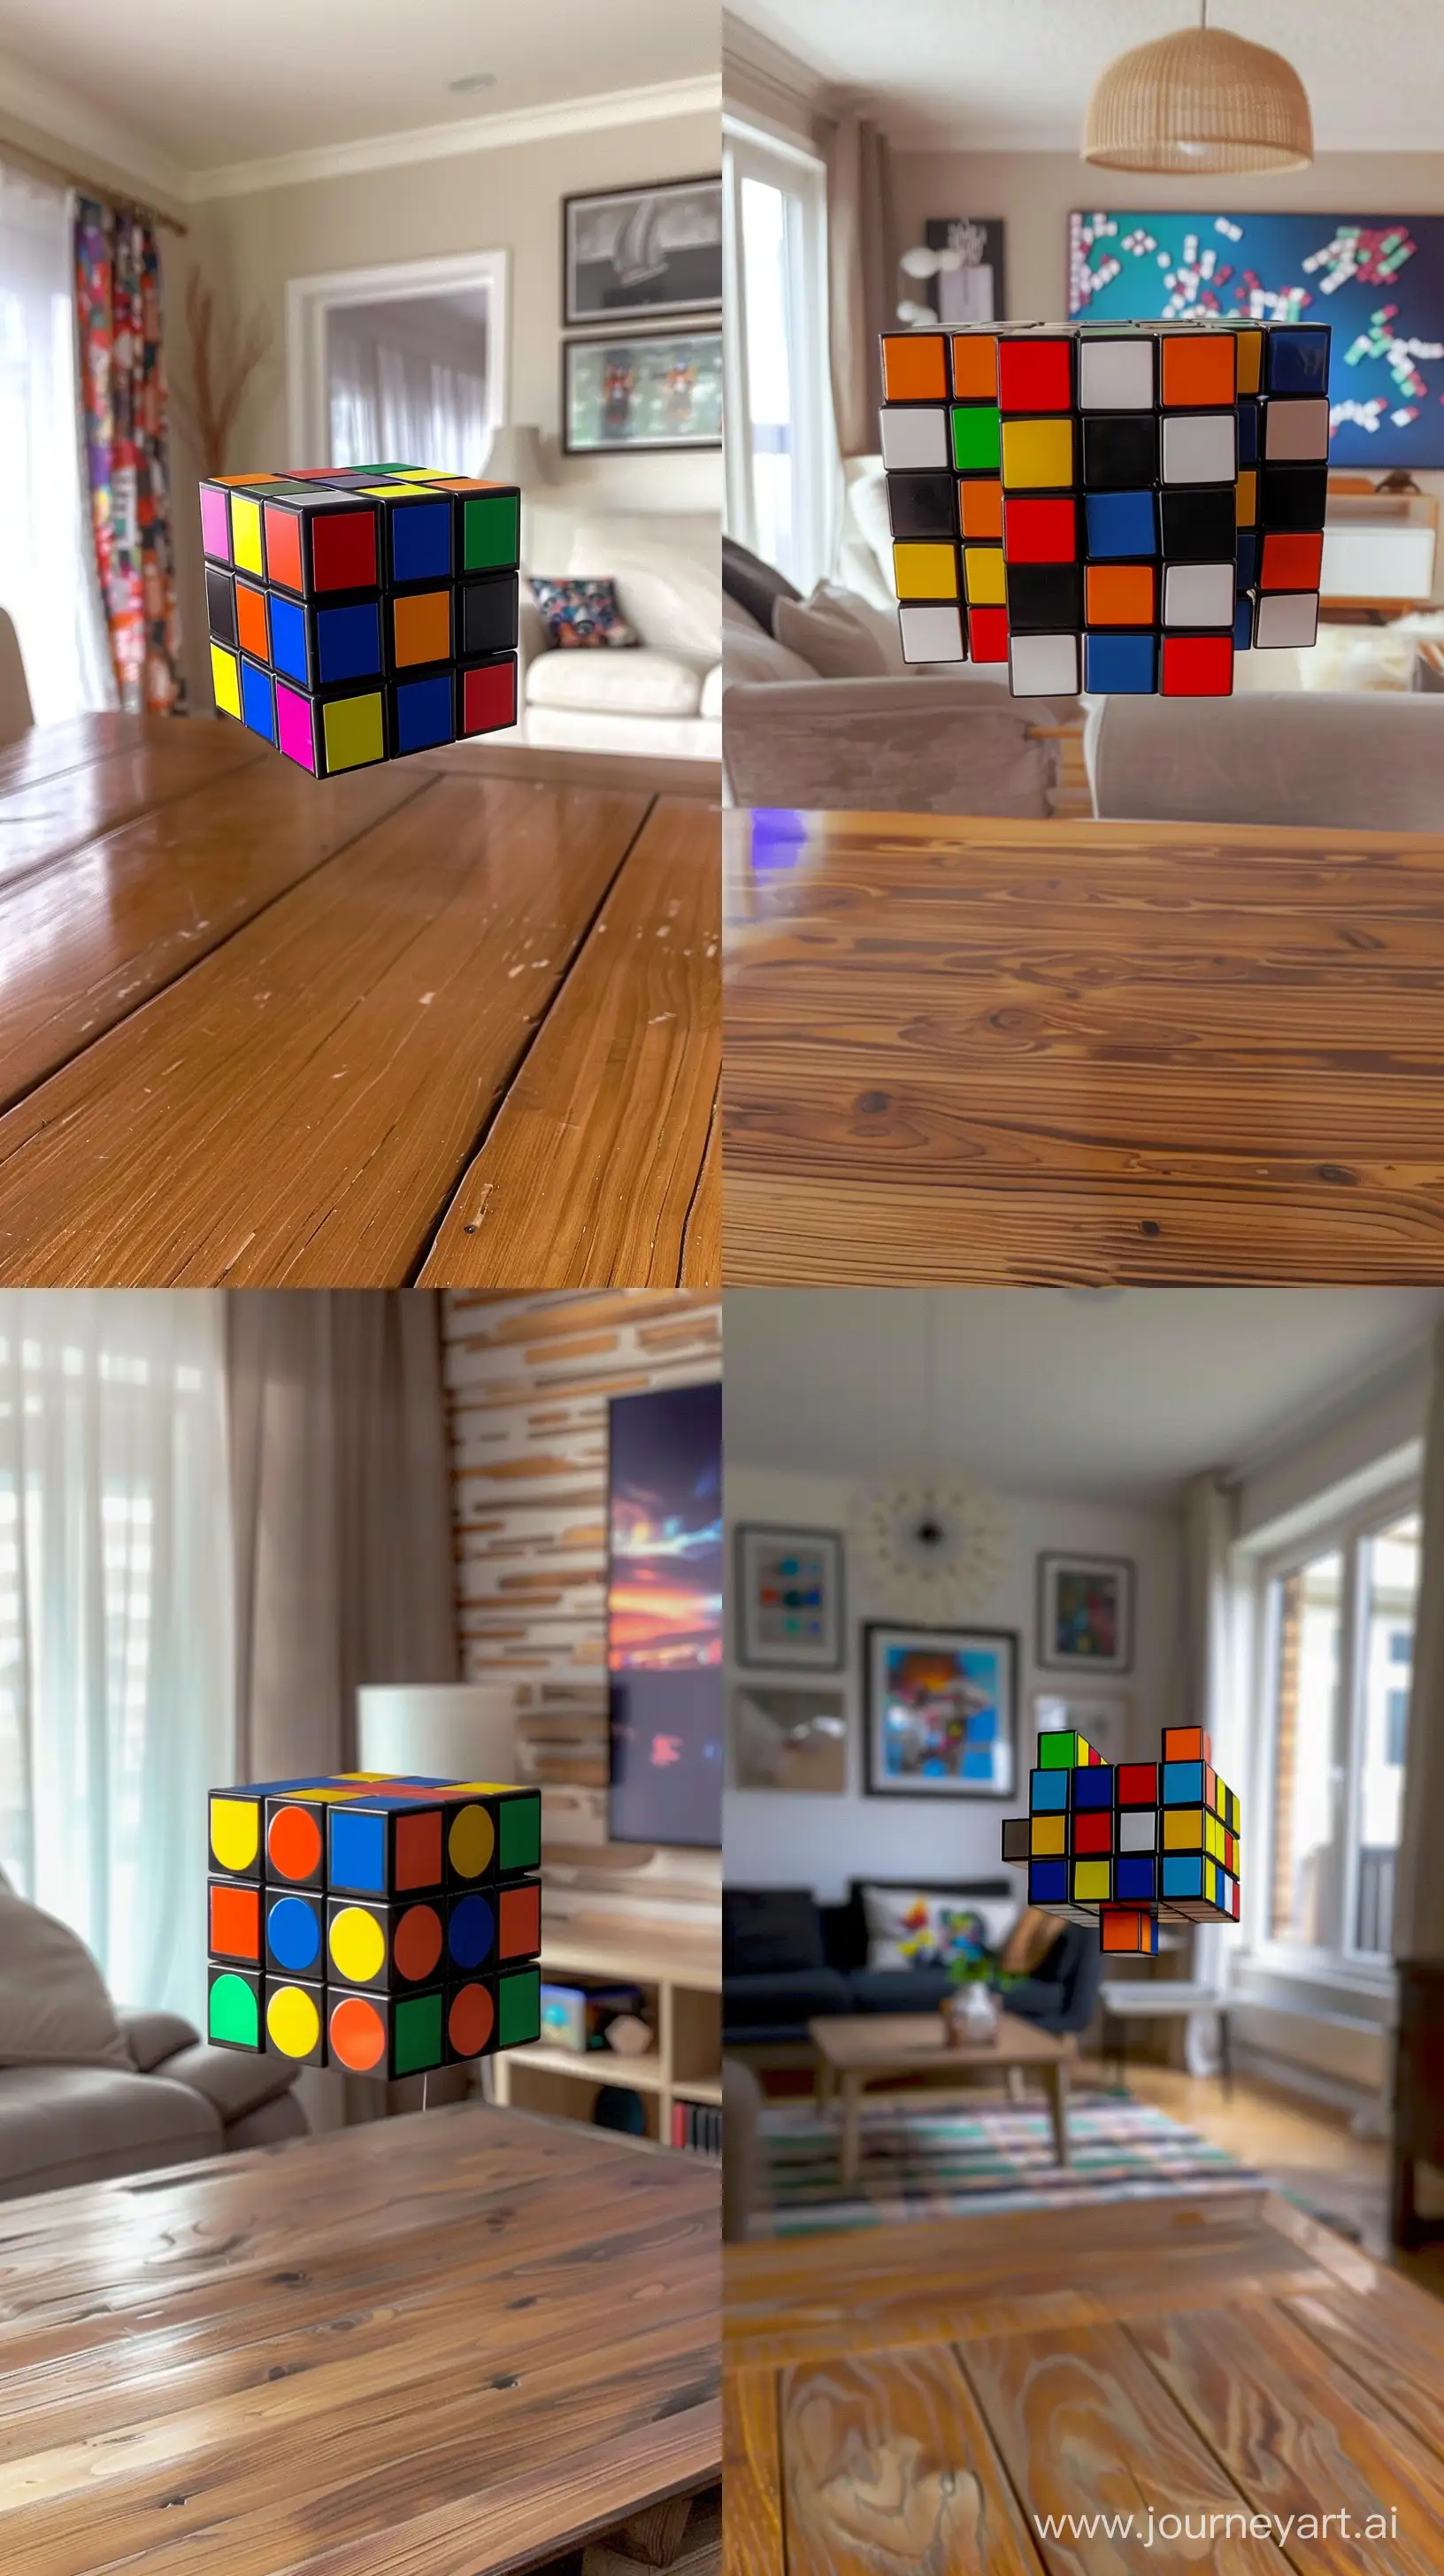 Vibrant-Rubiks-Cube-Puzzle-on-a-Wooden-Table-in-Welllit-Living-Room